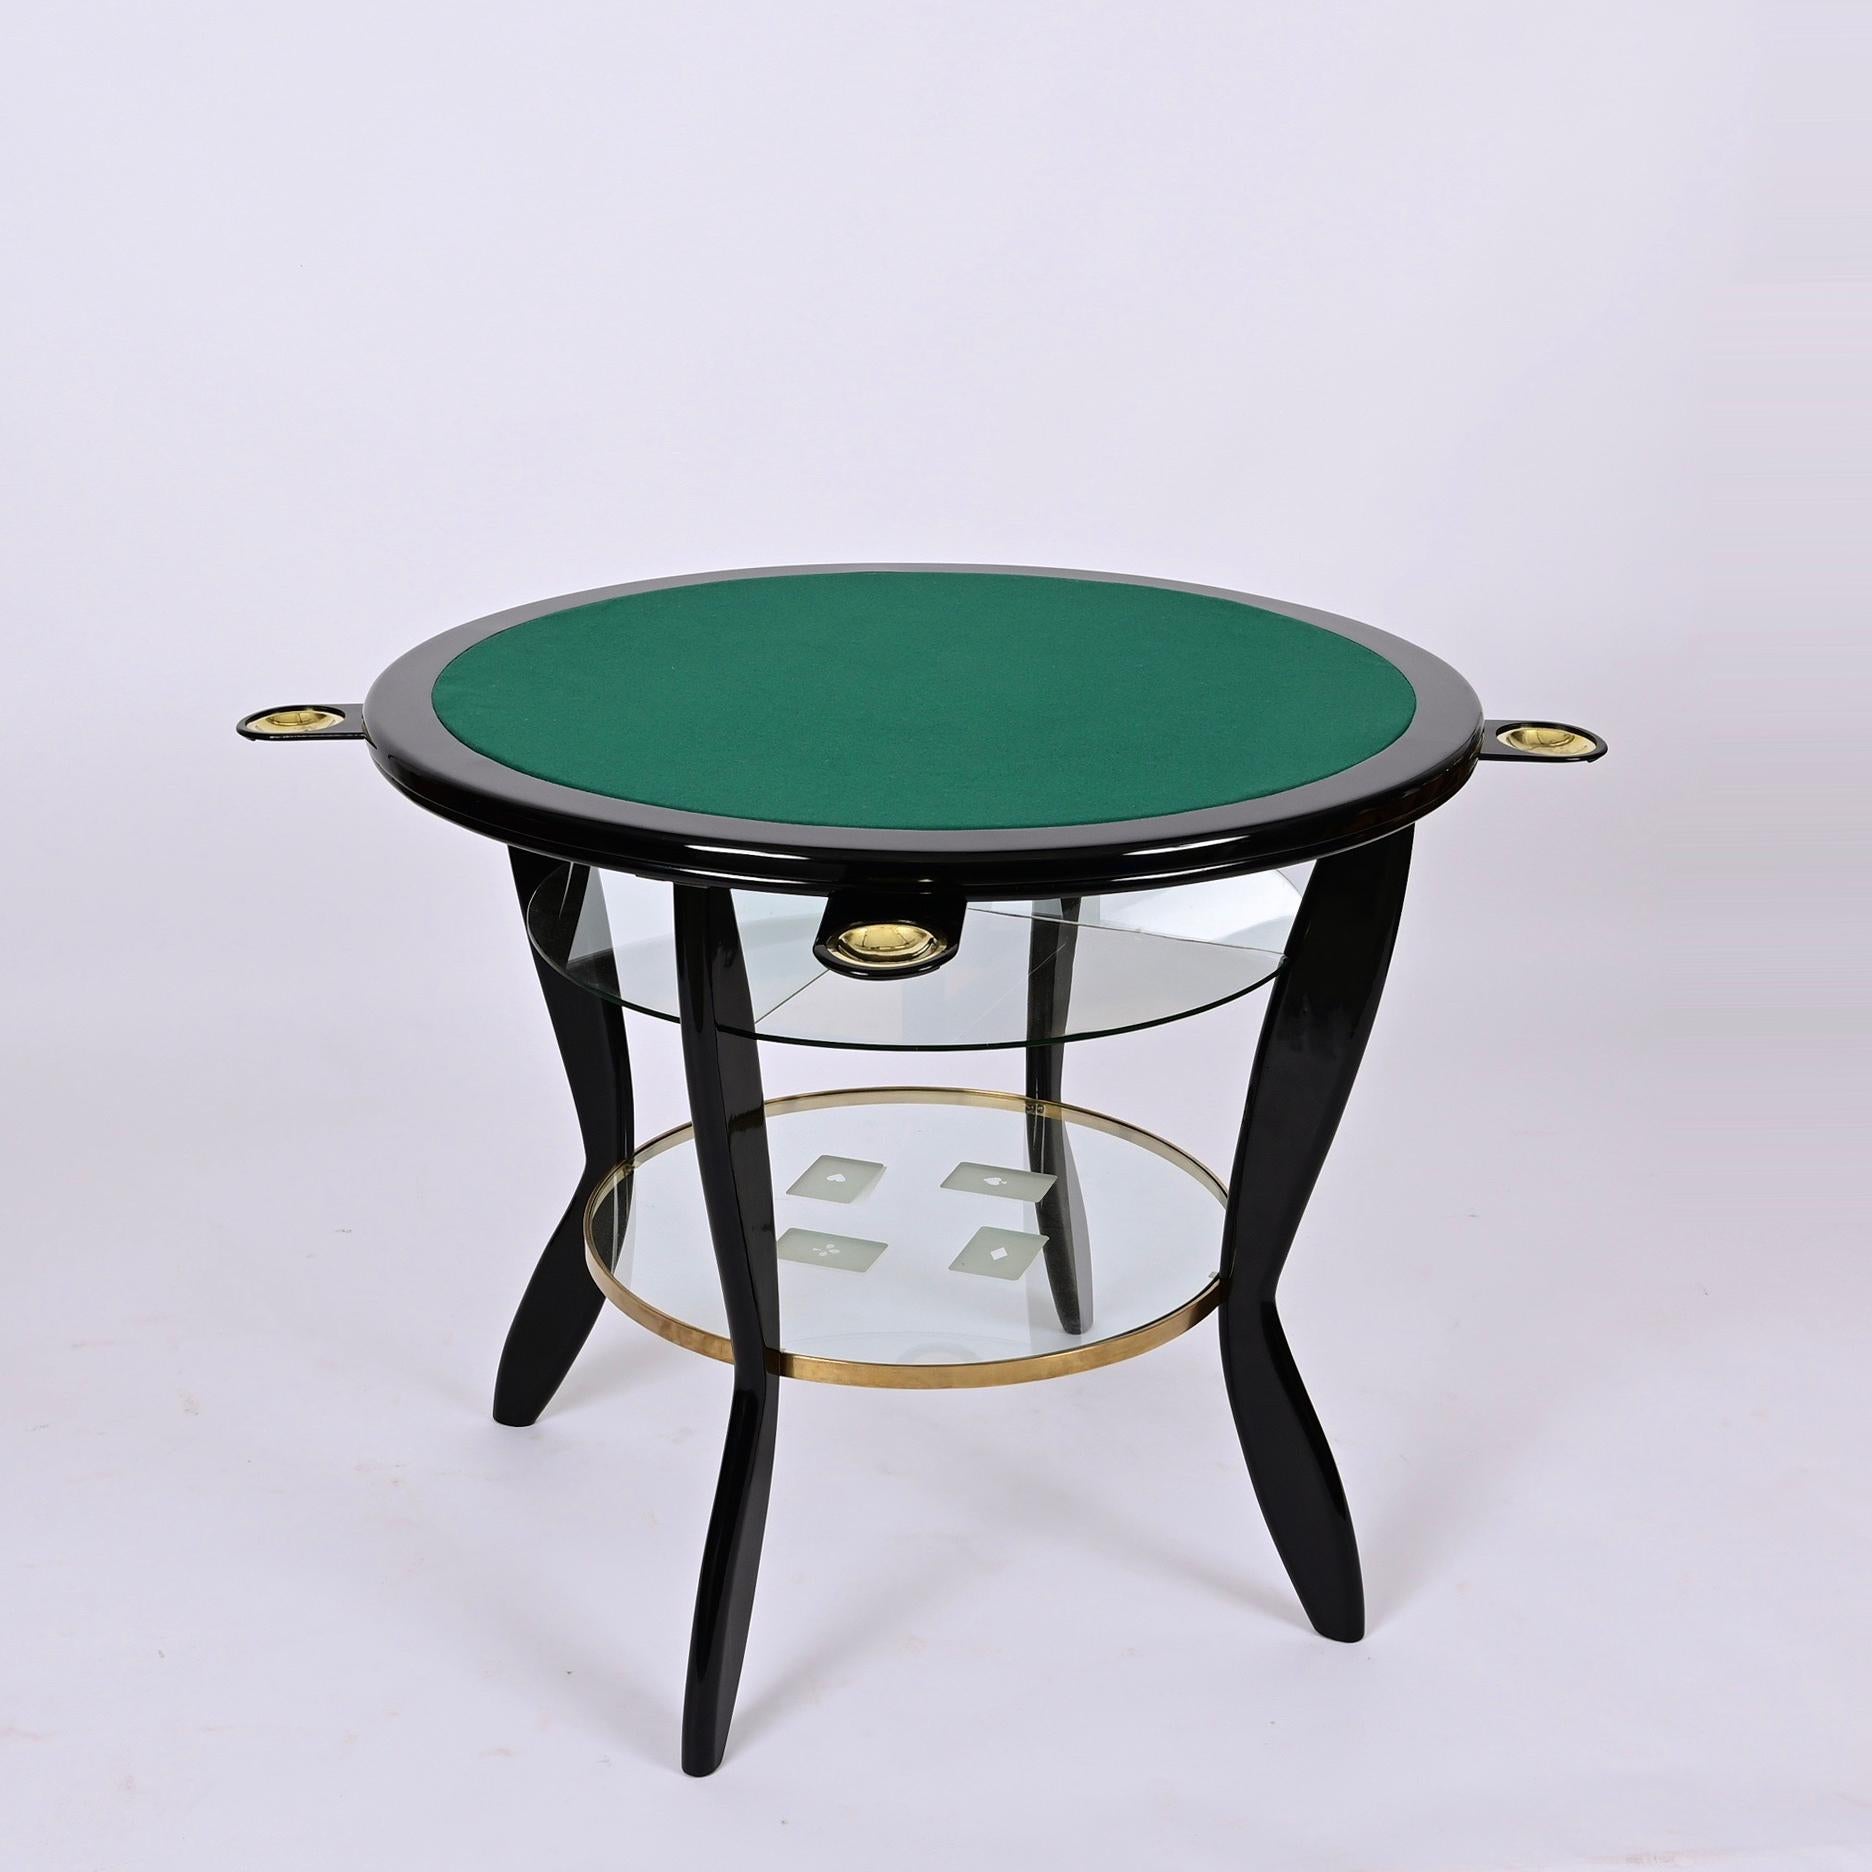 Gio Ponti Style Ebonized Beech and Brass Italian Game Table with Glass, 1950s For Sale 2